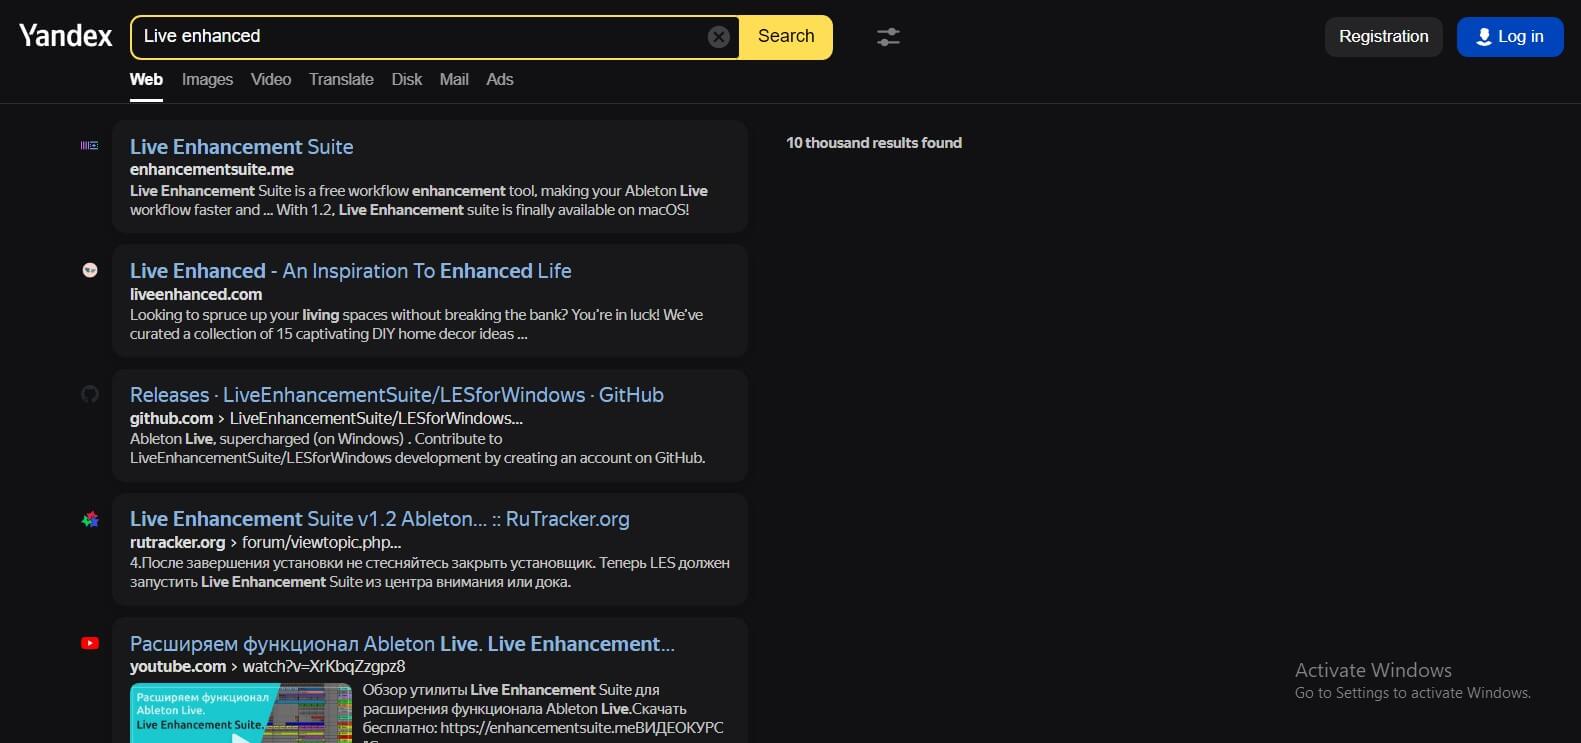 Yandex search engine Search query "Live Enhanced"